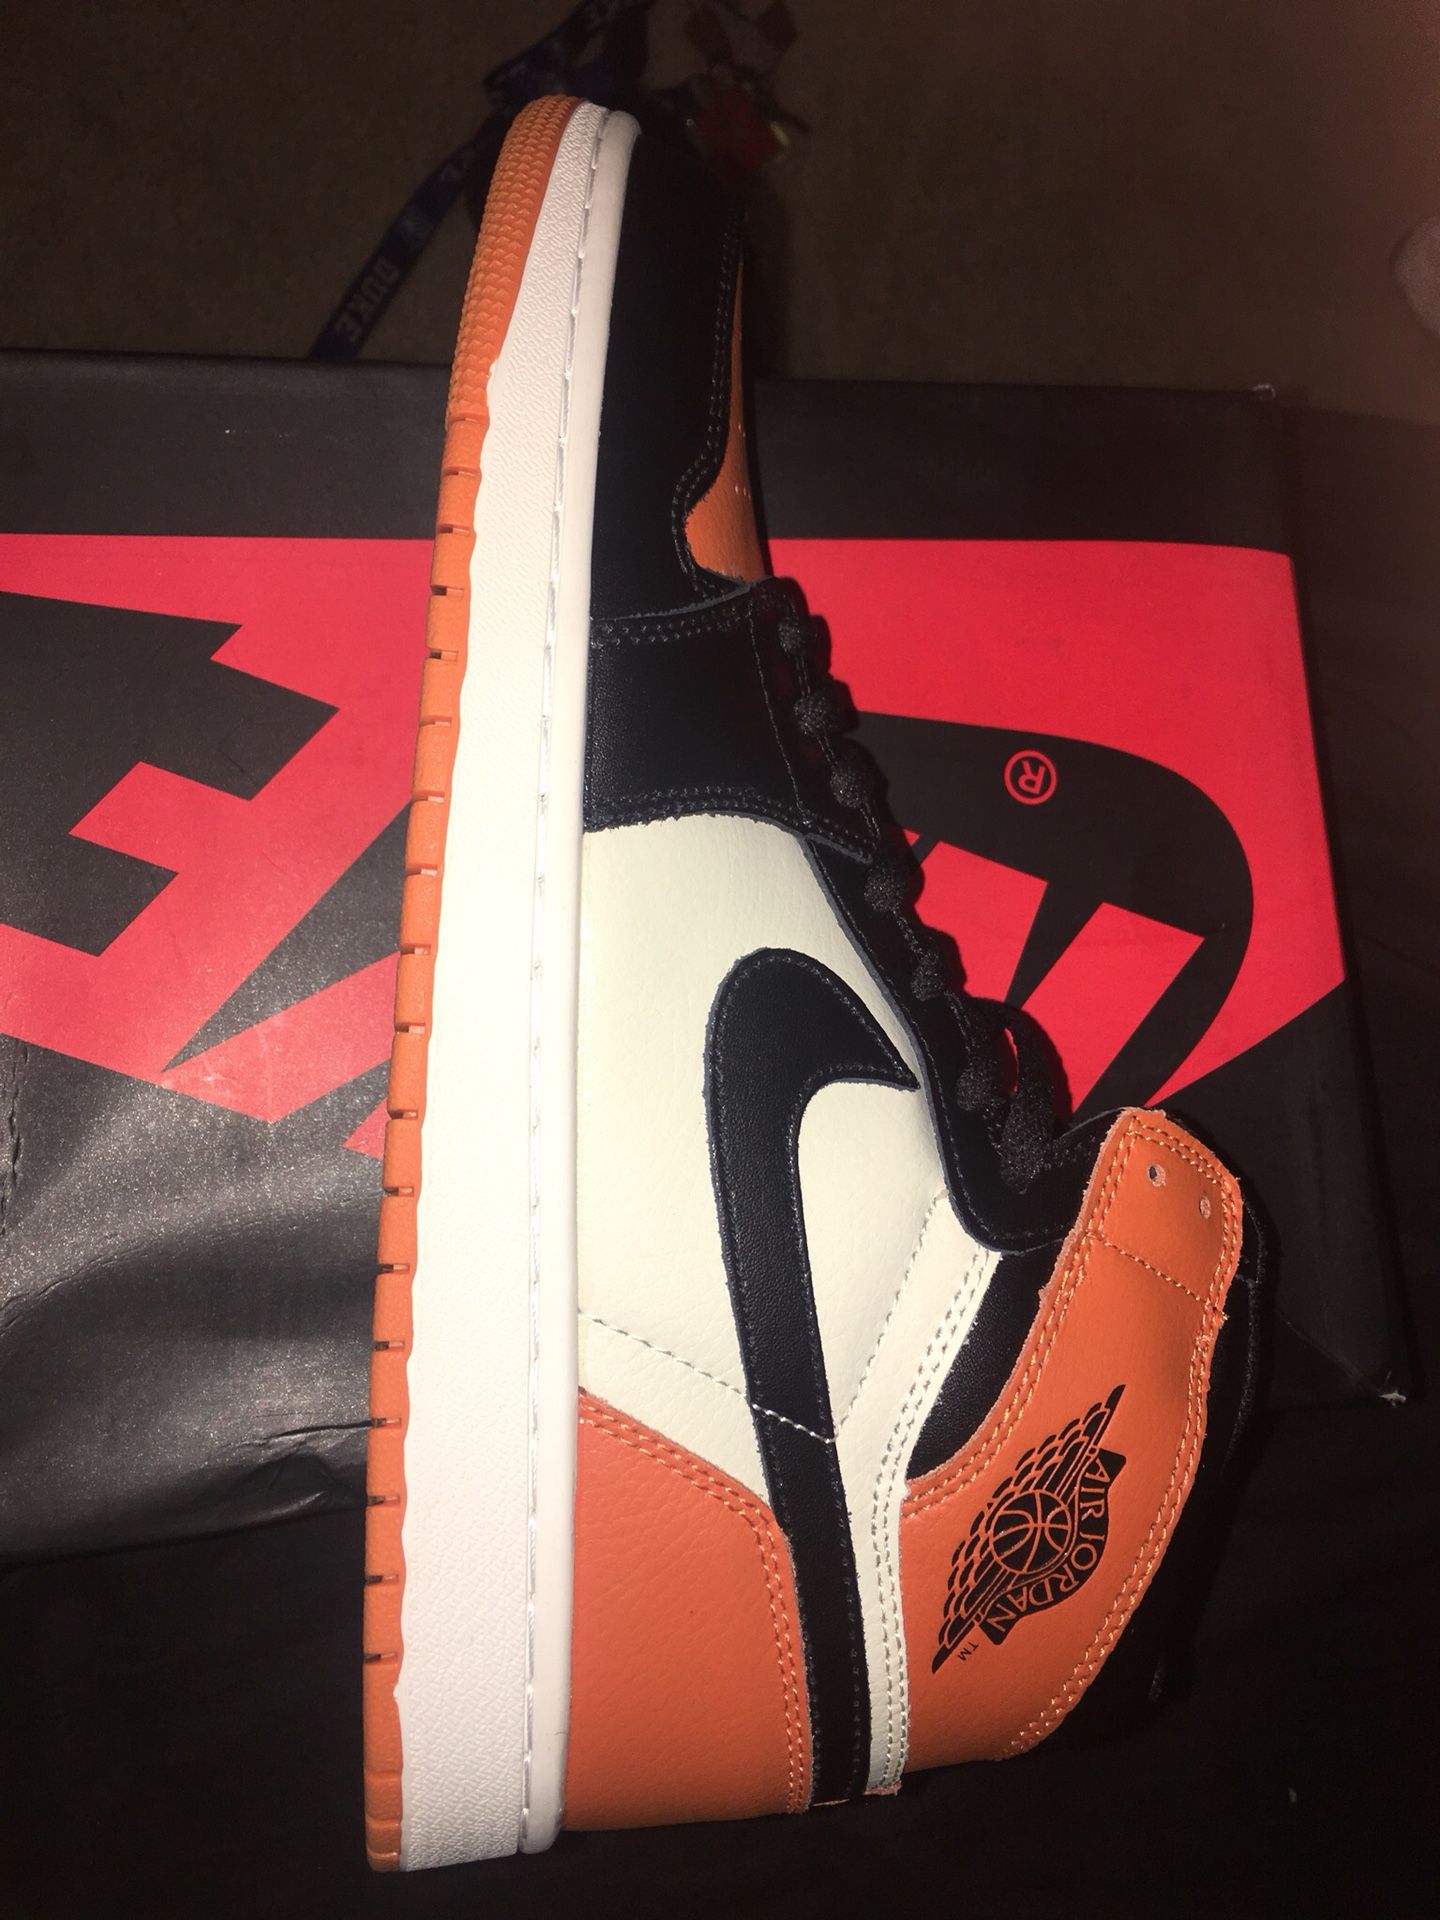 DS SBB 1s size 12